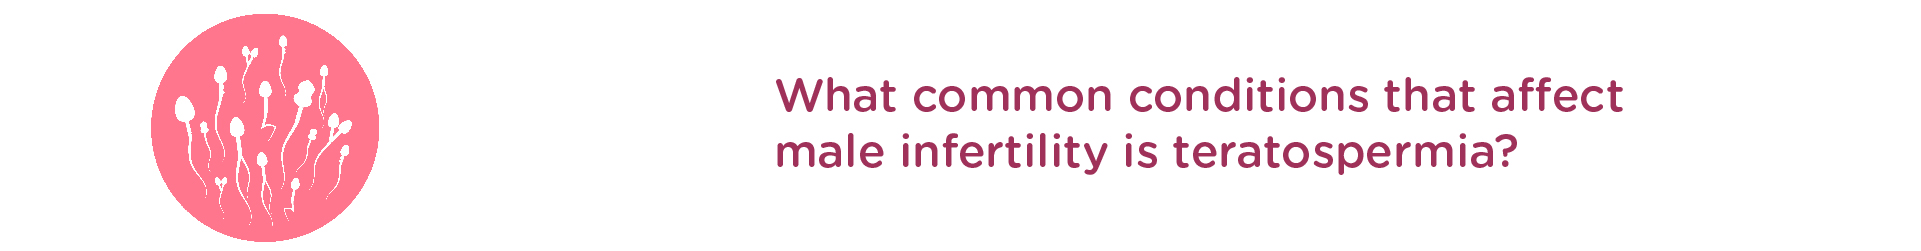 What Common conditions that affect male infertility is teratospermia?